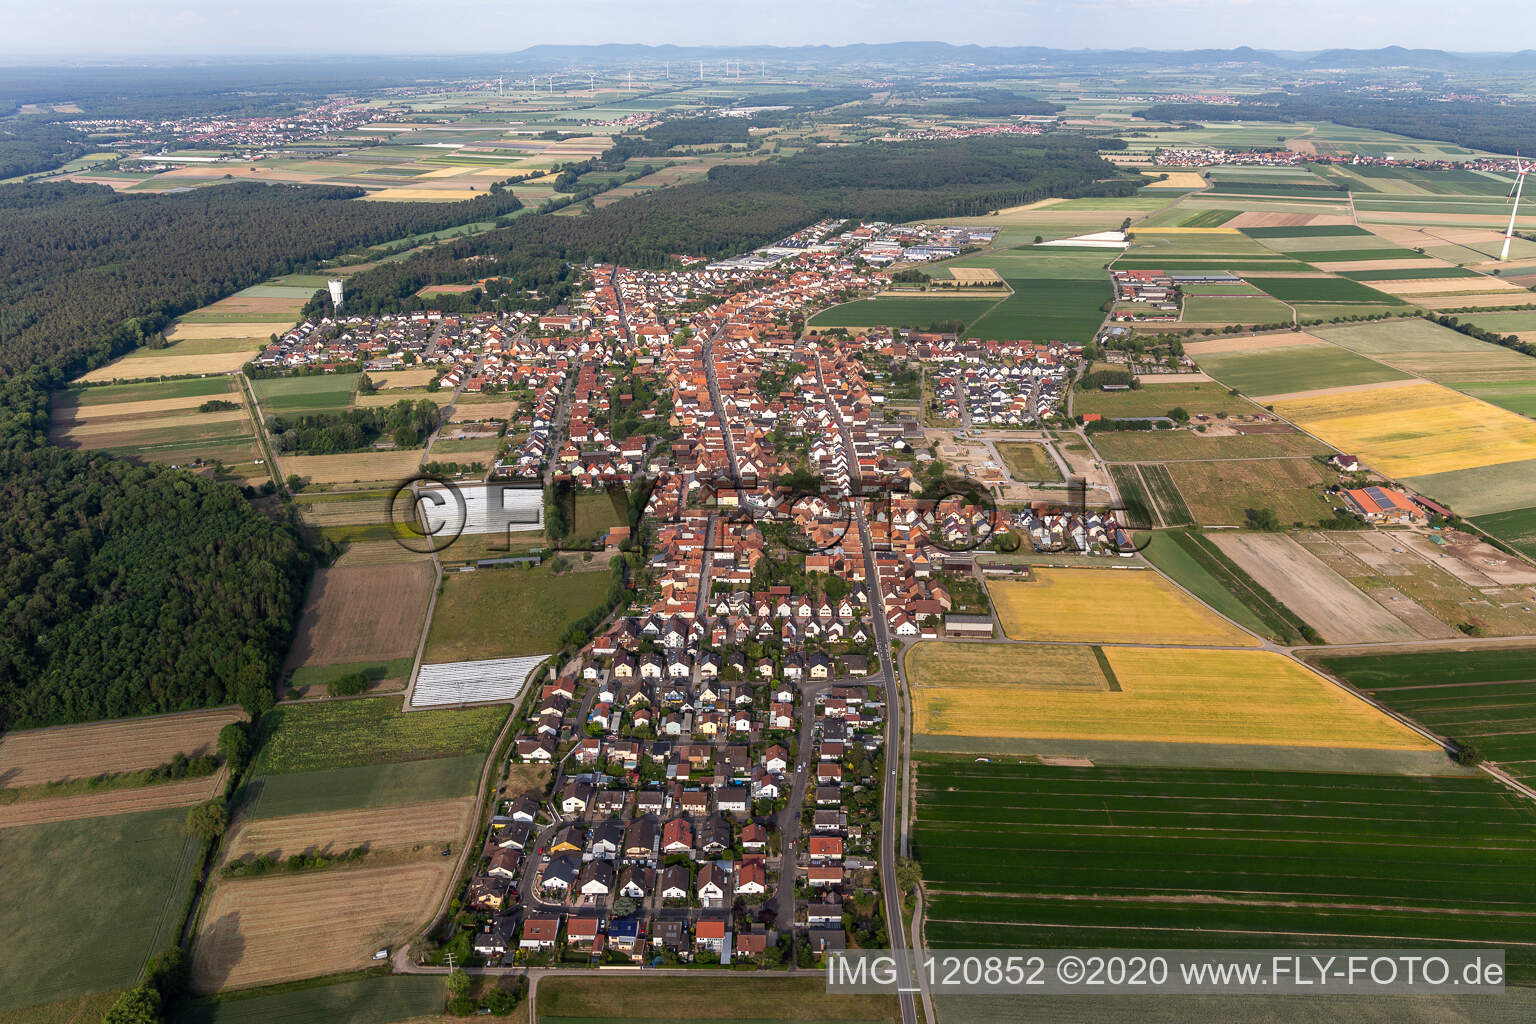 Hatzenbühl in the state Rhineland-Palatinate, Germany from the drone perspective